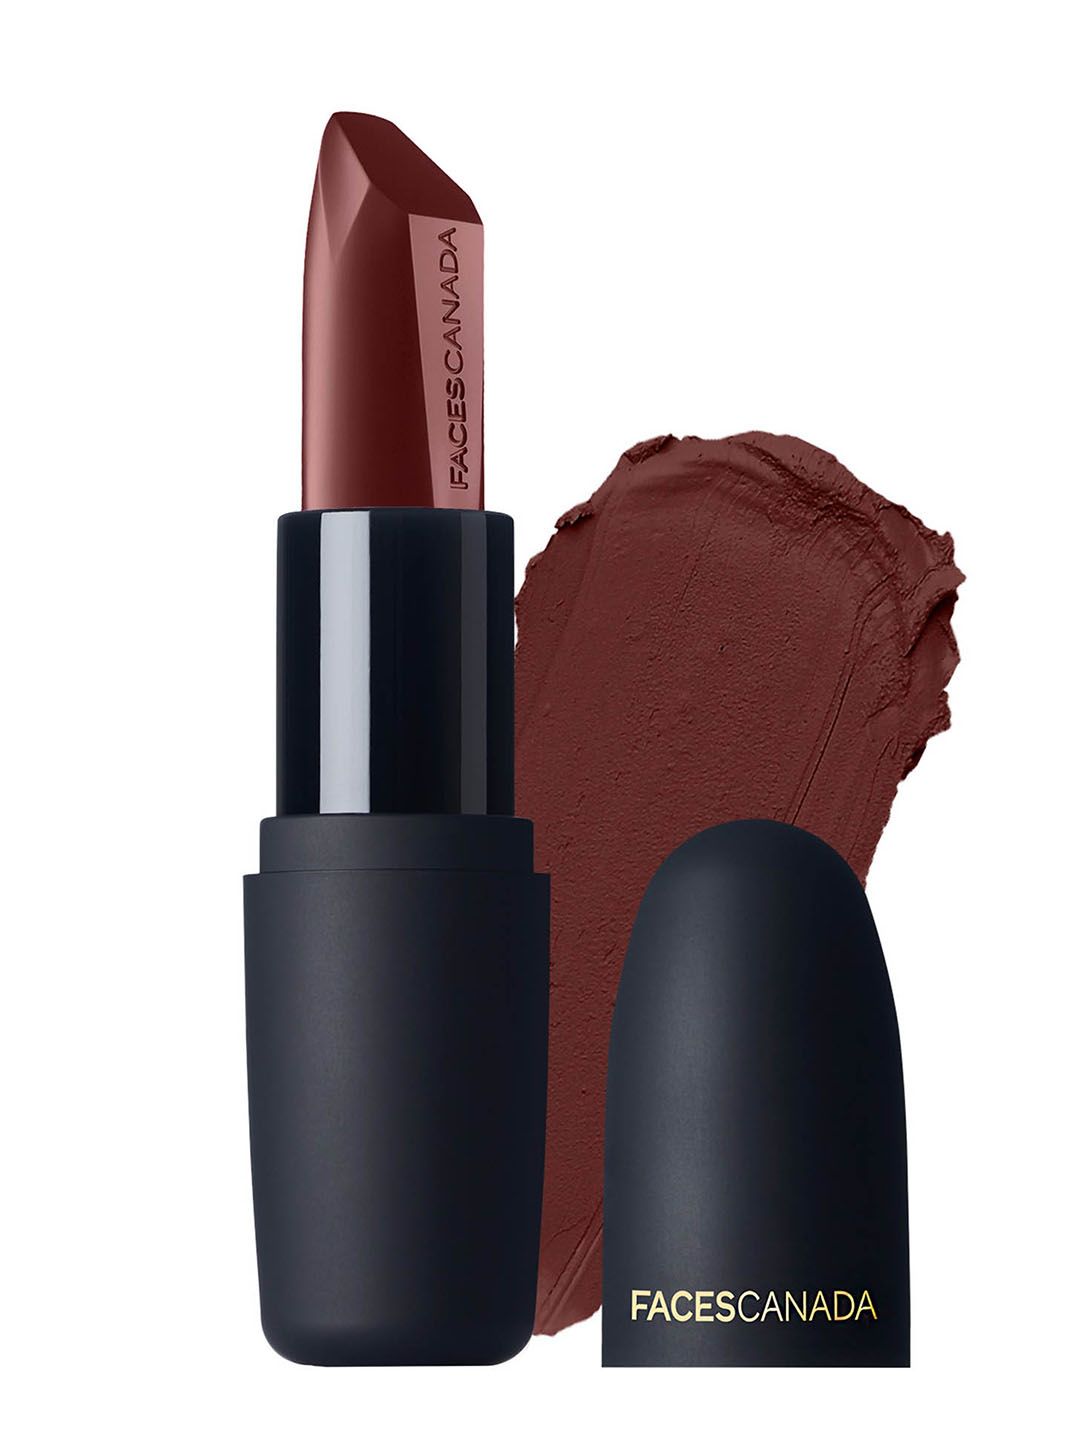 Faces Canada Weightless Matte Hydrating Lipstick with Almond Oil - Brown Ashes 25 Price in India